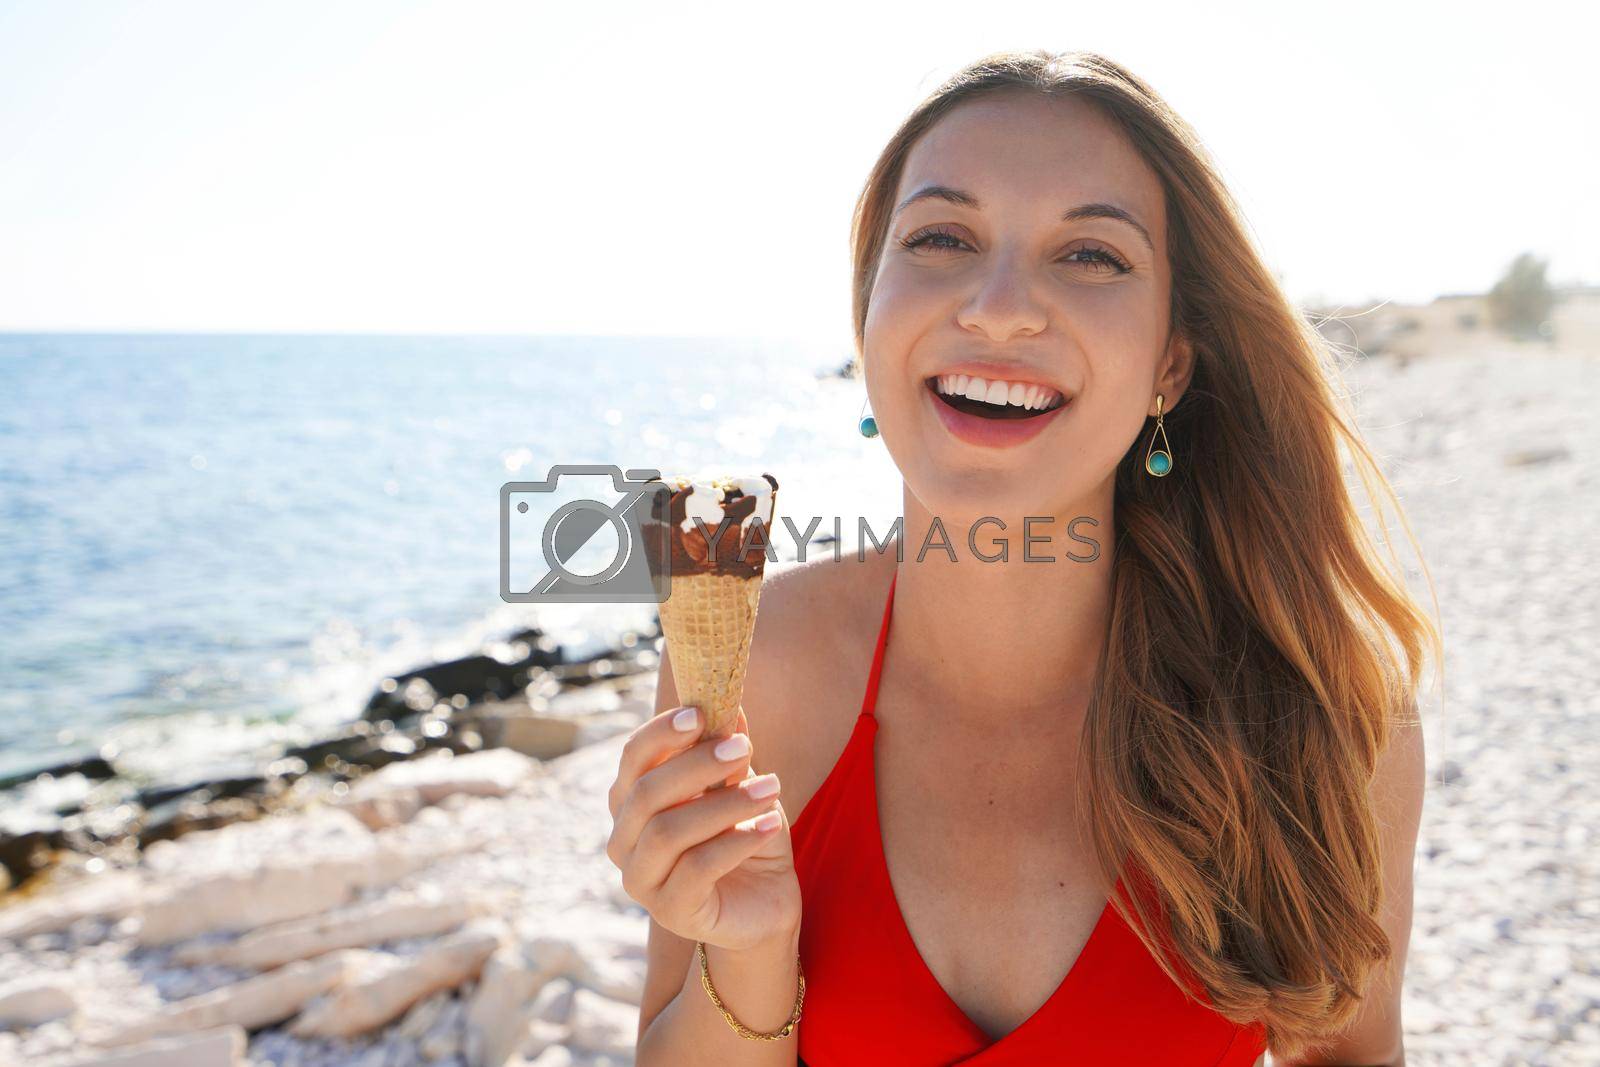 Royalty free image of Beautiful young woman smiling with ice cream cone looking at camera on beach by sergio_monti